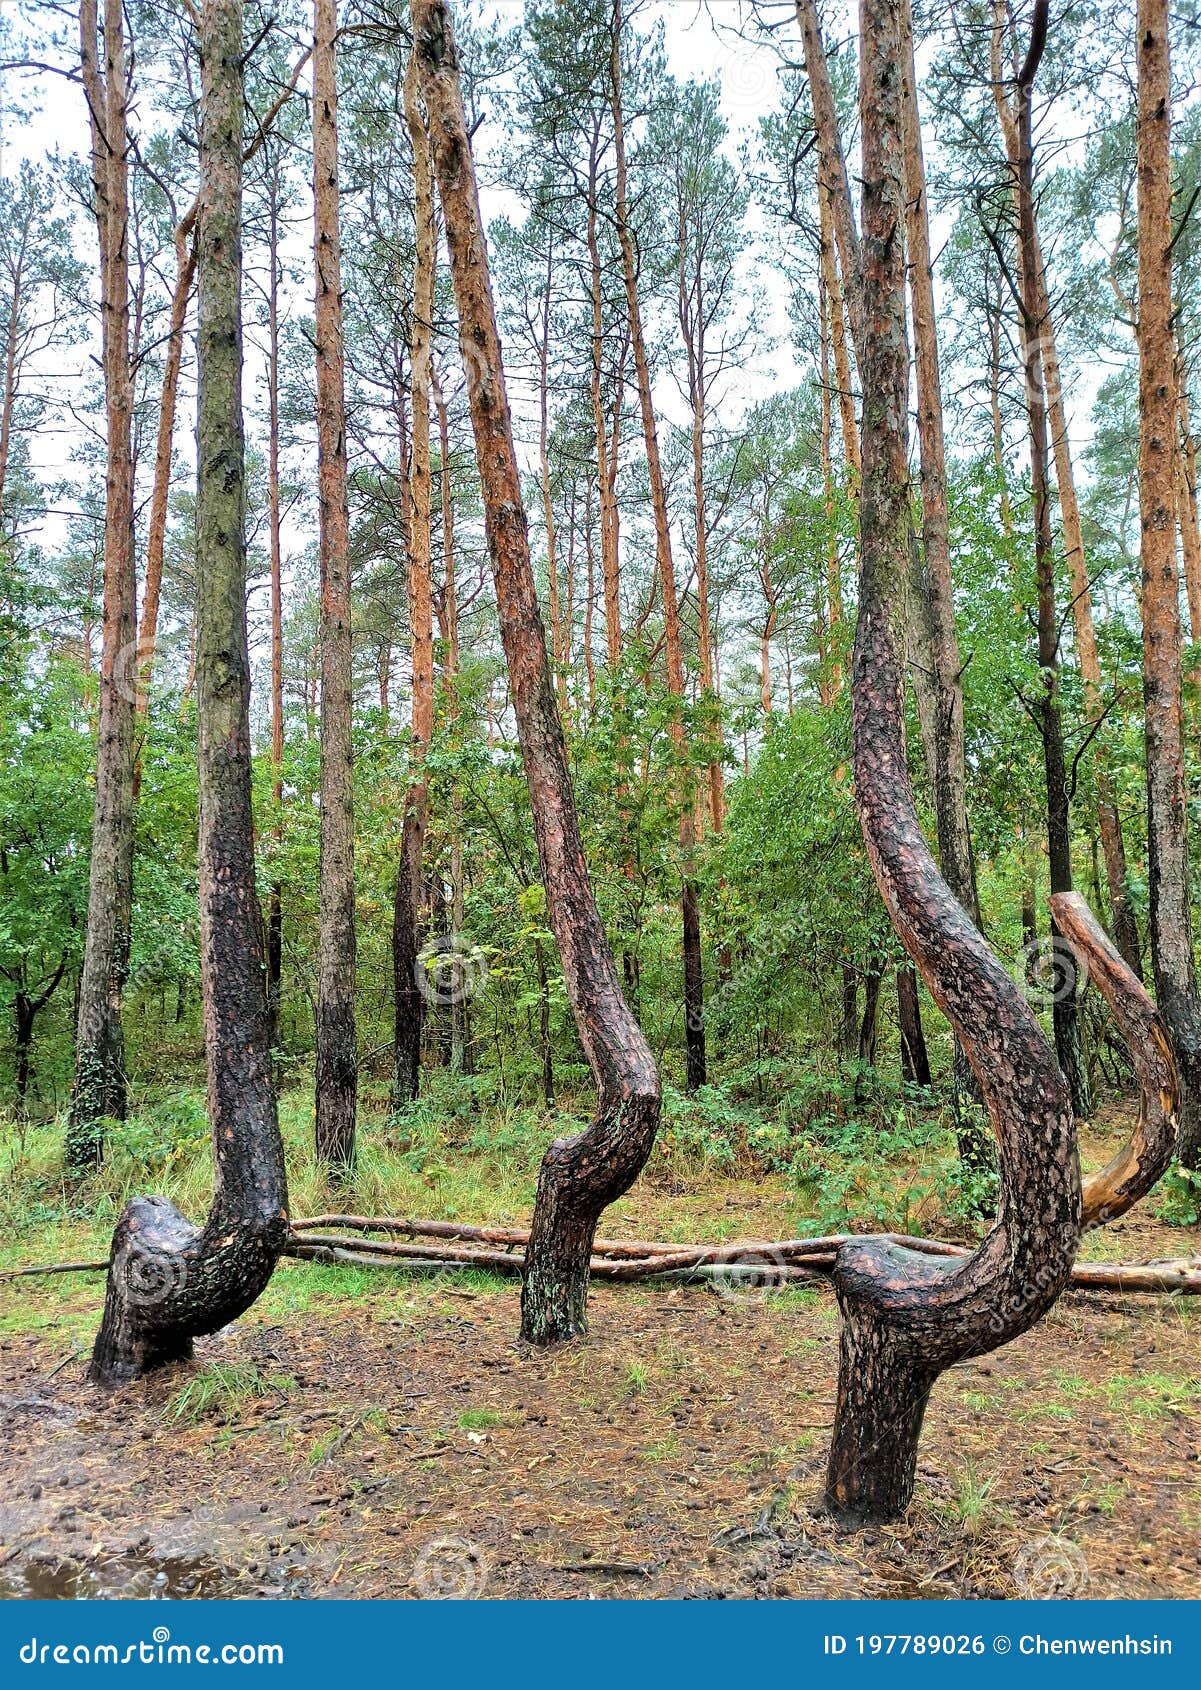 visit crooked forest on your trip to gryfino or poland